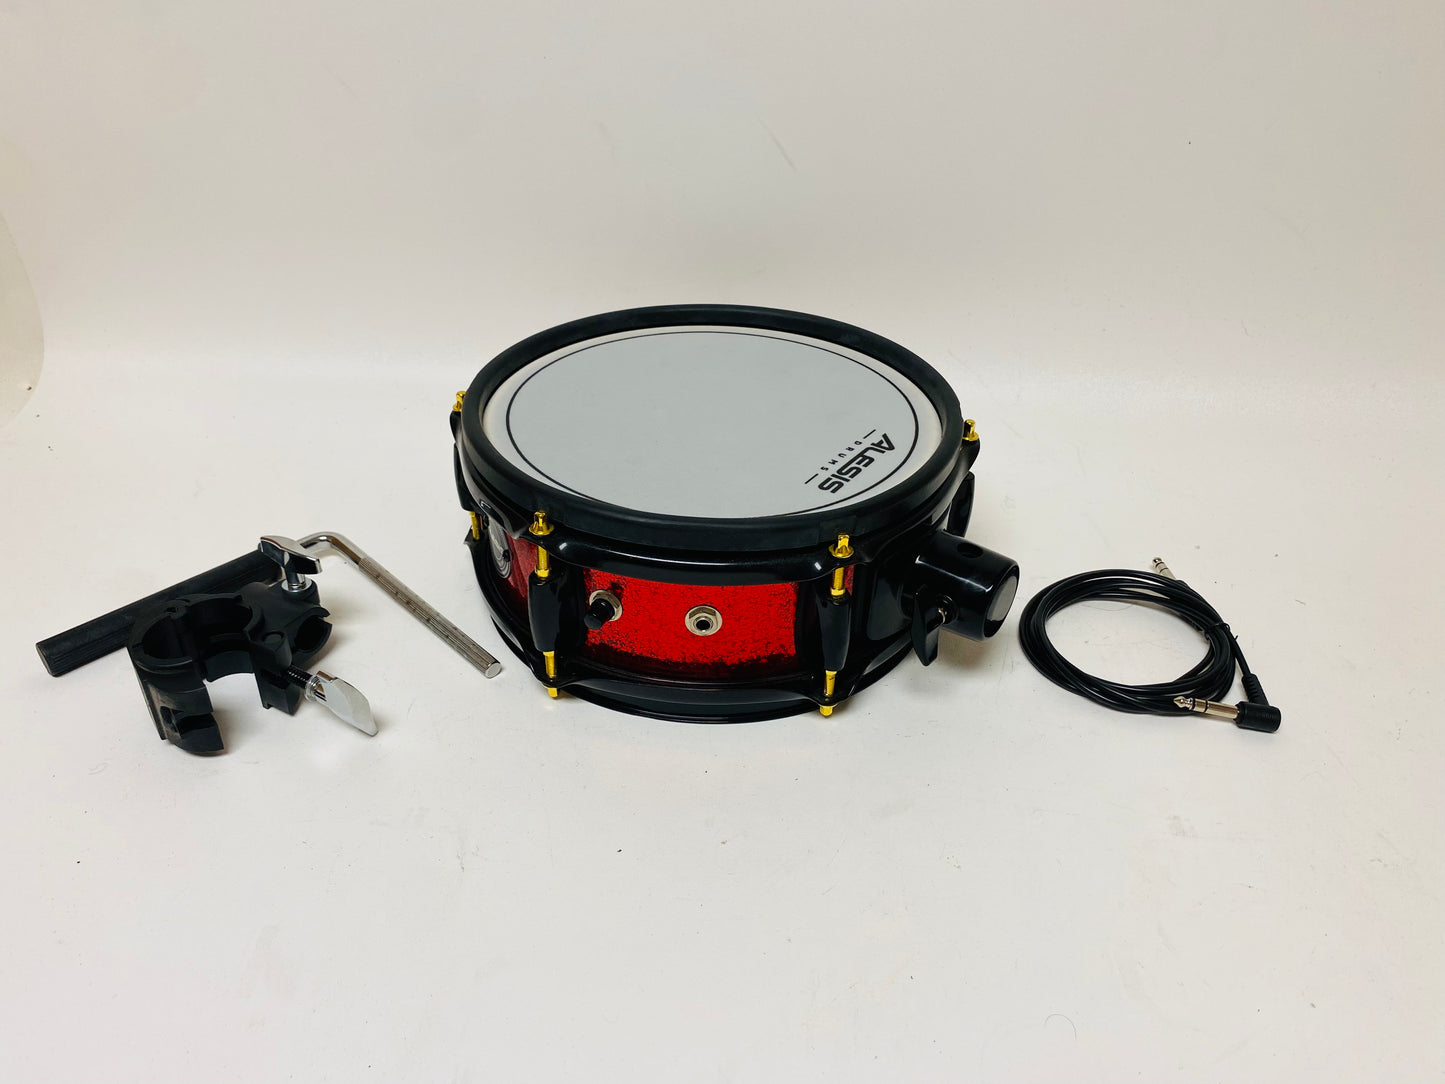 Alesis Strike SE 10” Mesh Drum Pad with Mount and Cable